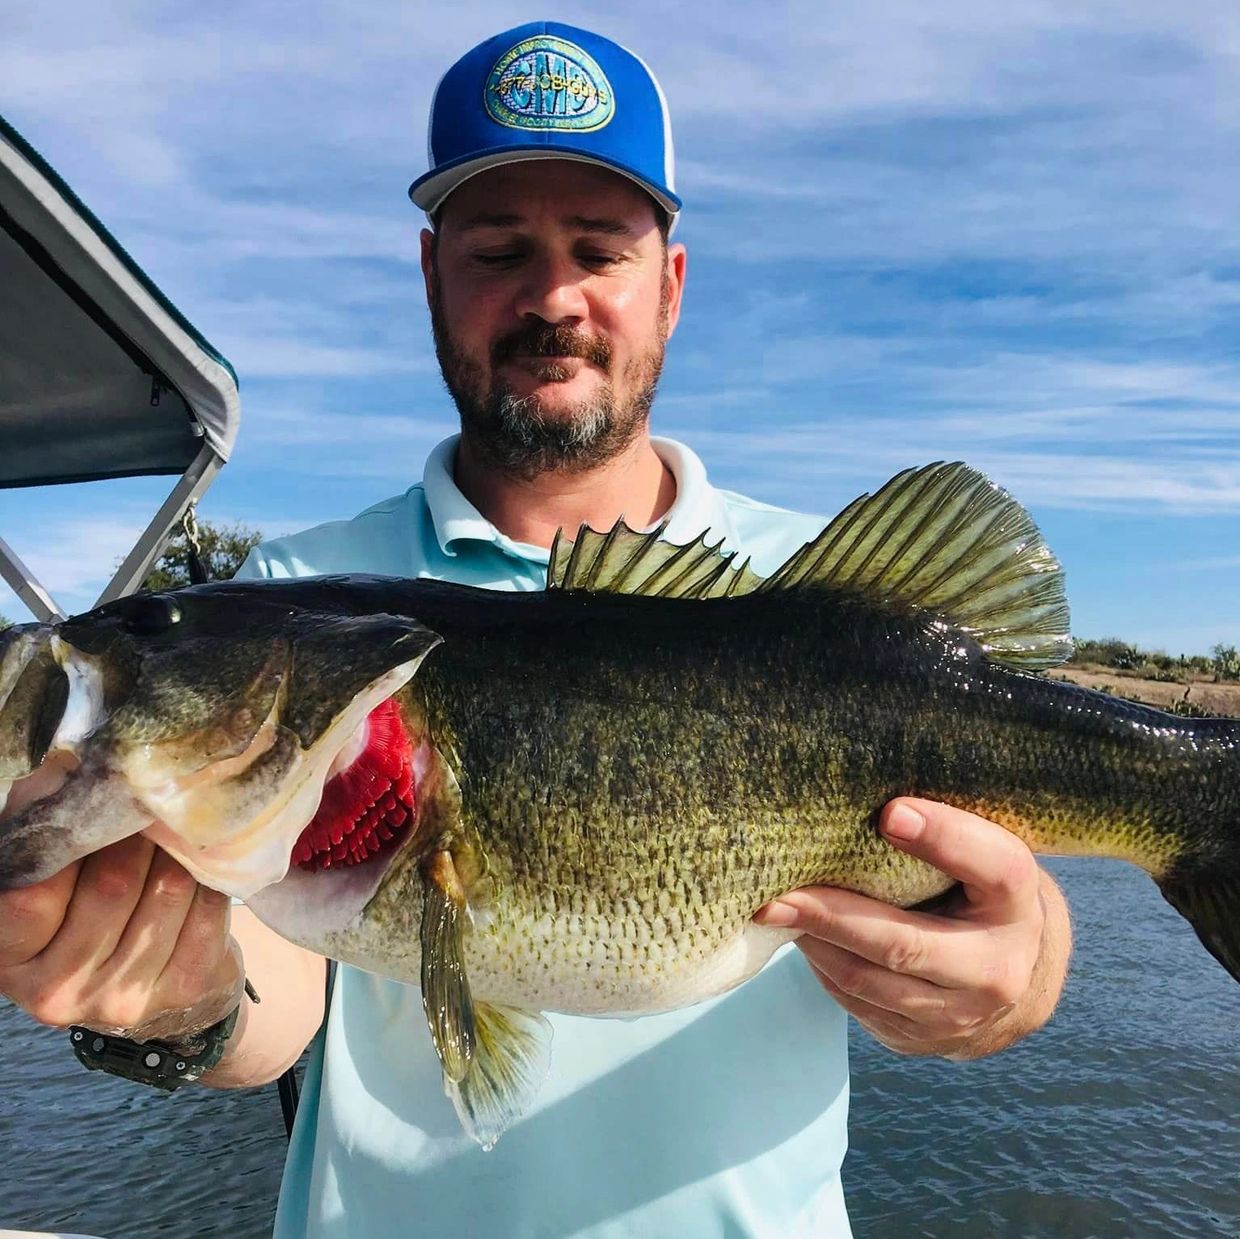 Charles B. Moody with his 10lbs Large Mouth Bass Caught on Lake L.B.J. Texas